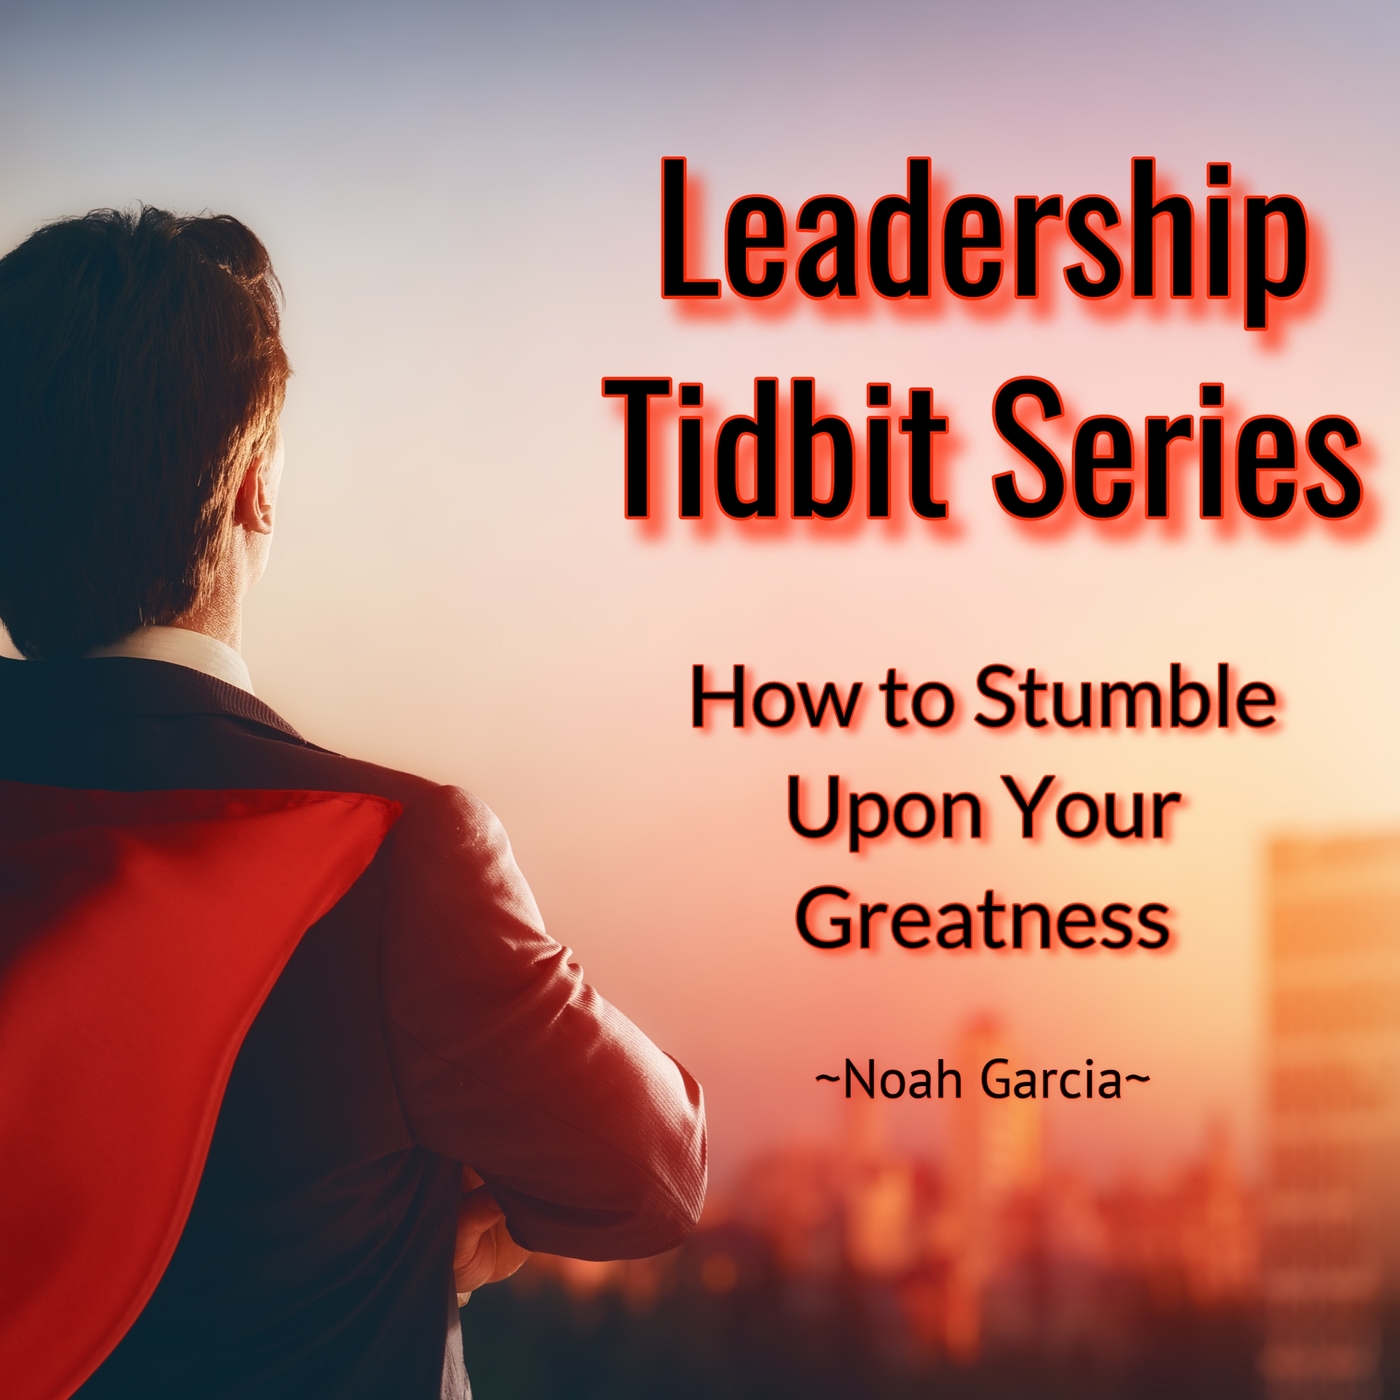 Leadership Tidbit Series: How to Stumble Upon Your Greatness